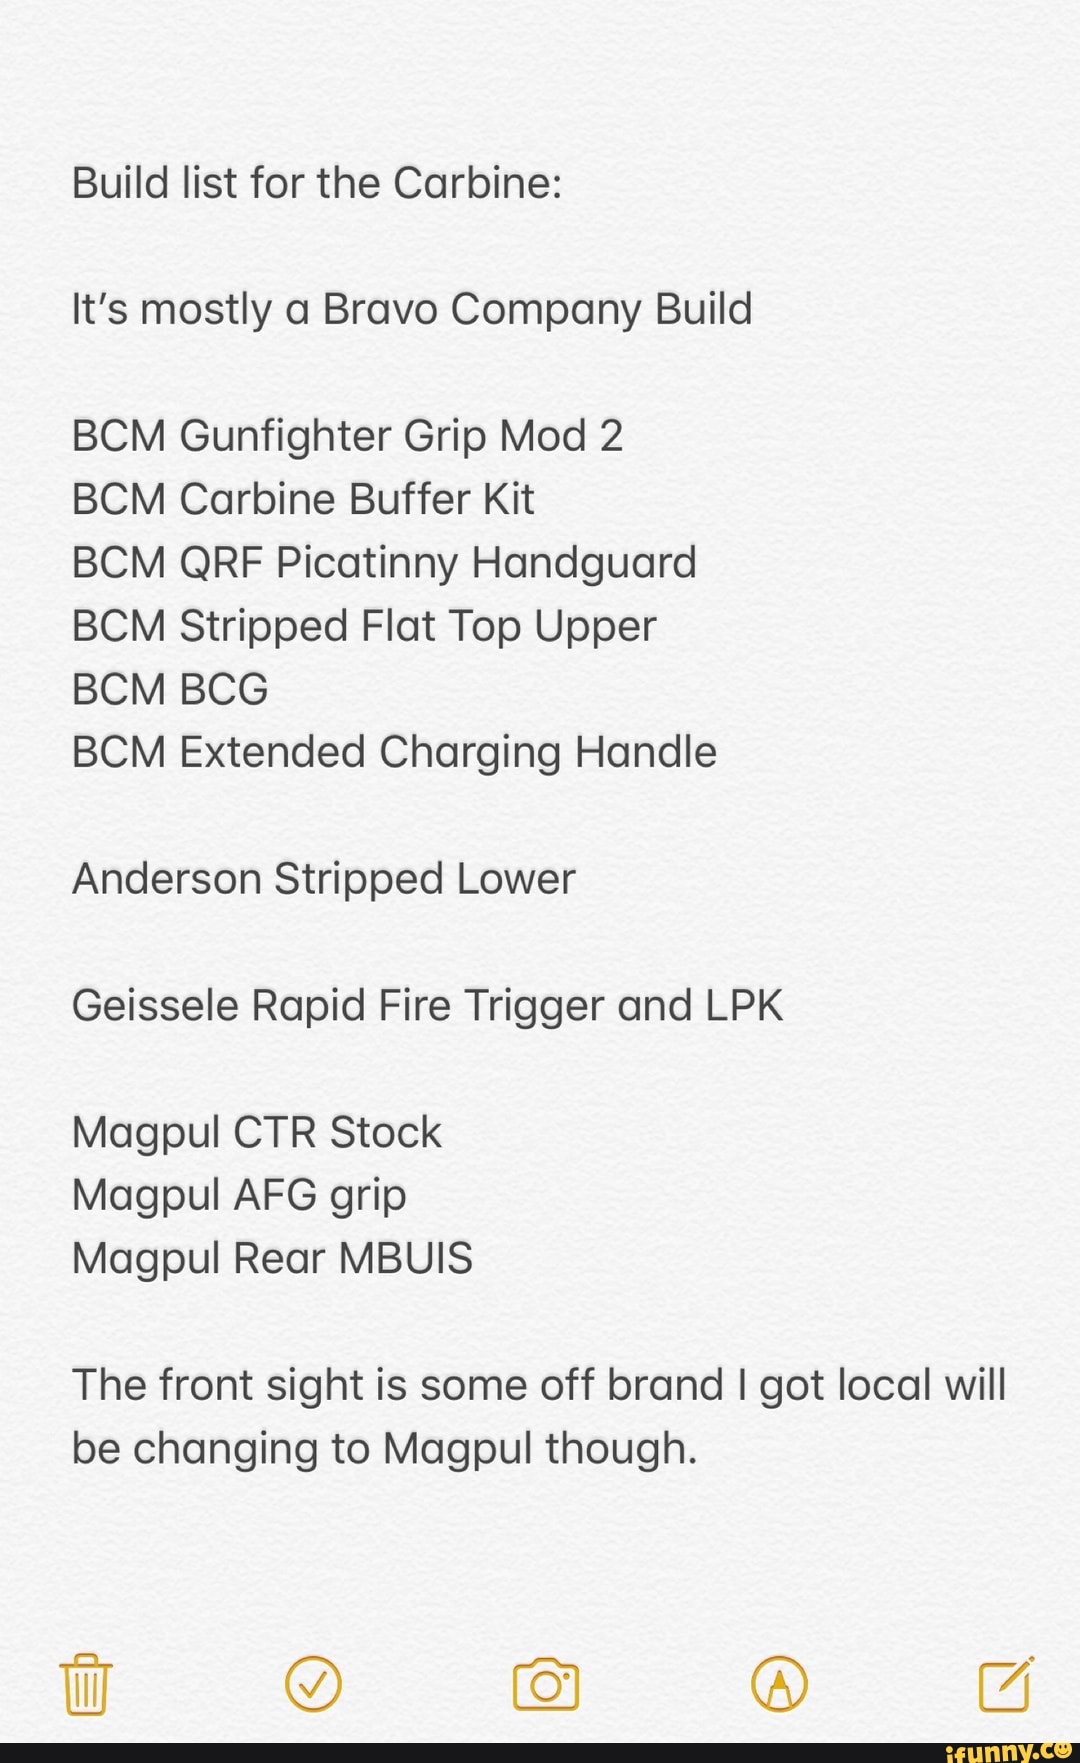 Build List For The Carbine It S Mostly A Bravo Company Build m Gunfighter Grip Mod 2 m Carbine Buffer Kit m Qrf Picatinny Handguard m Stripped Flat Top Upper m g m